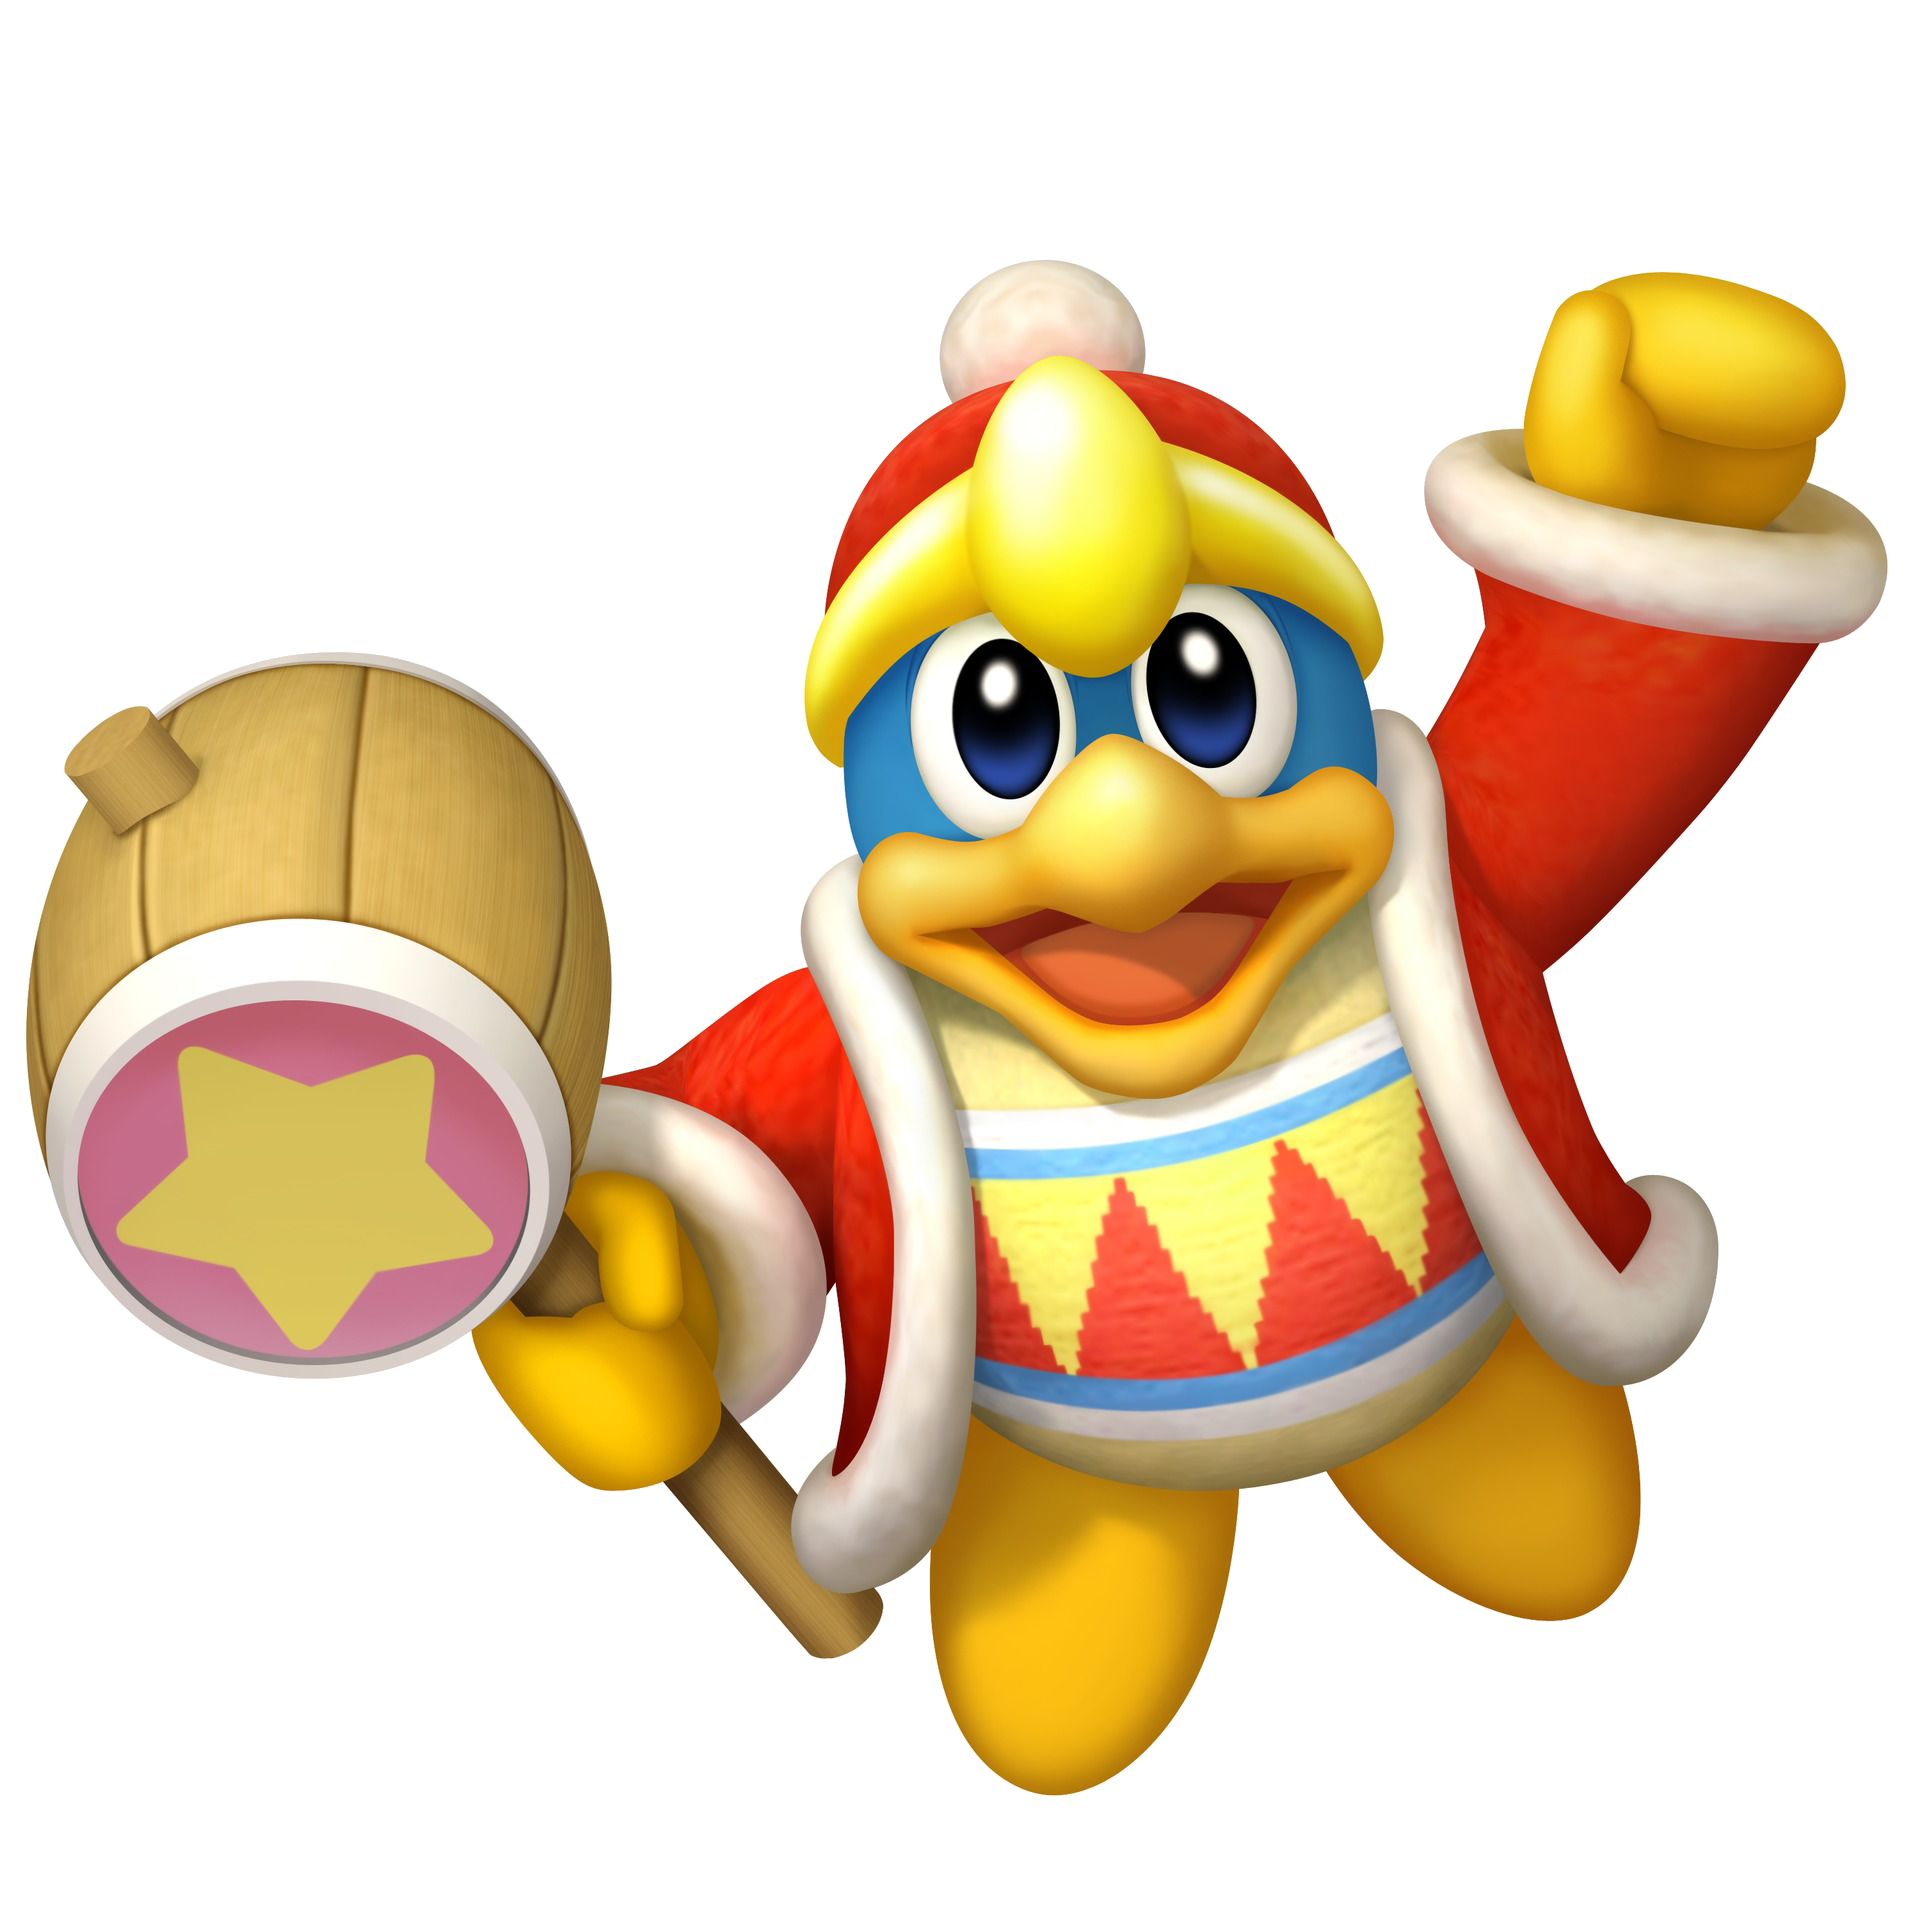 King Dedede - Fictional Characters Wiki